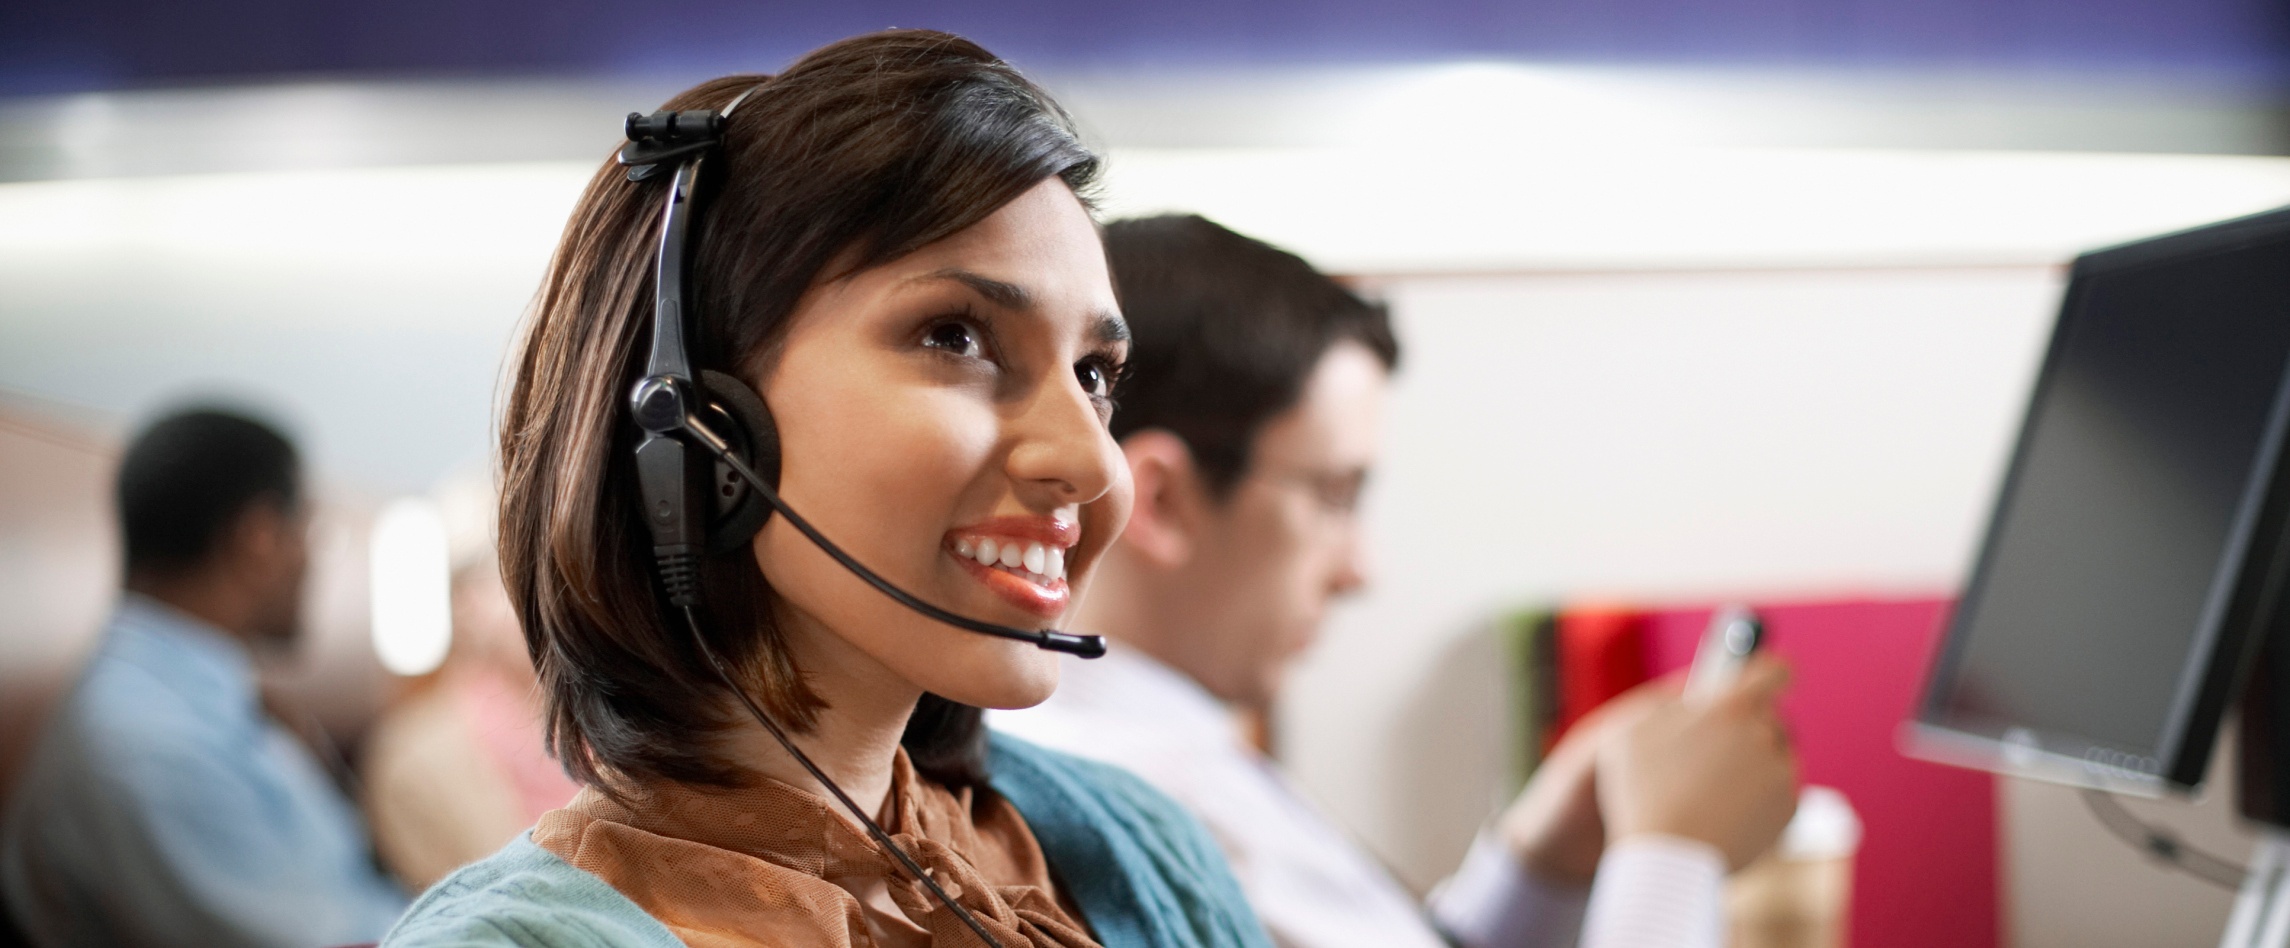 20 Critical Customer Service Skills All Sales Reps Should Master [Infographic]